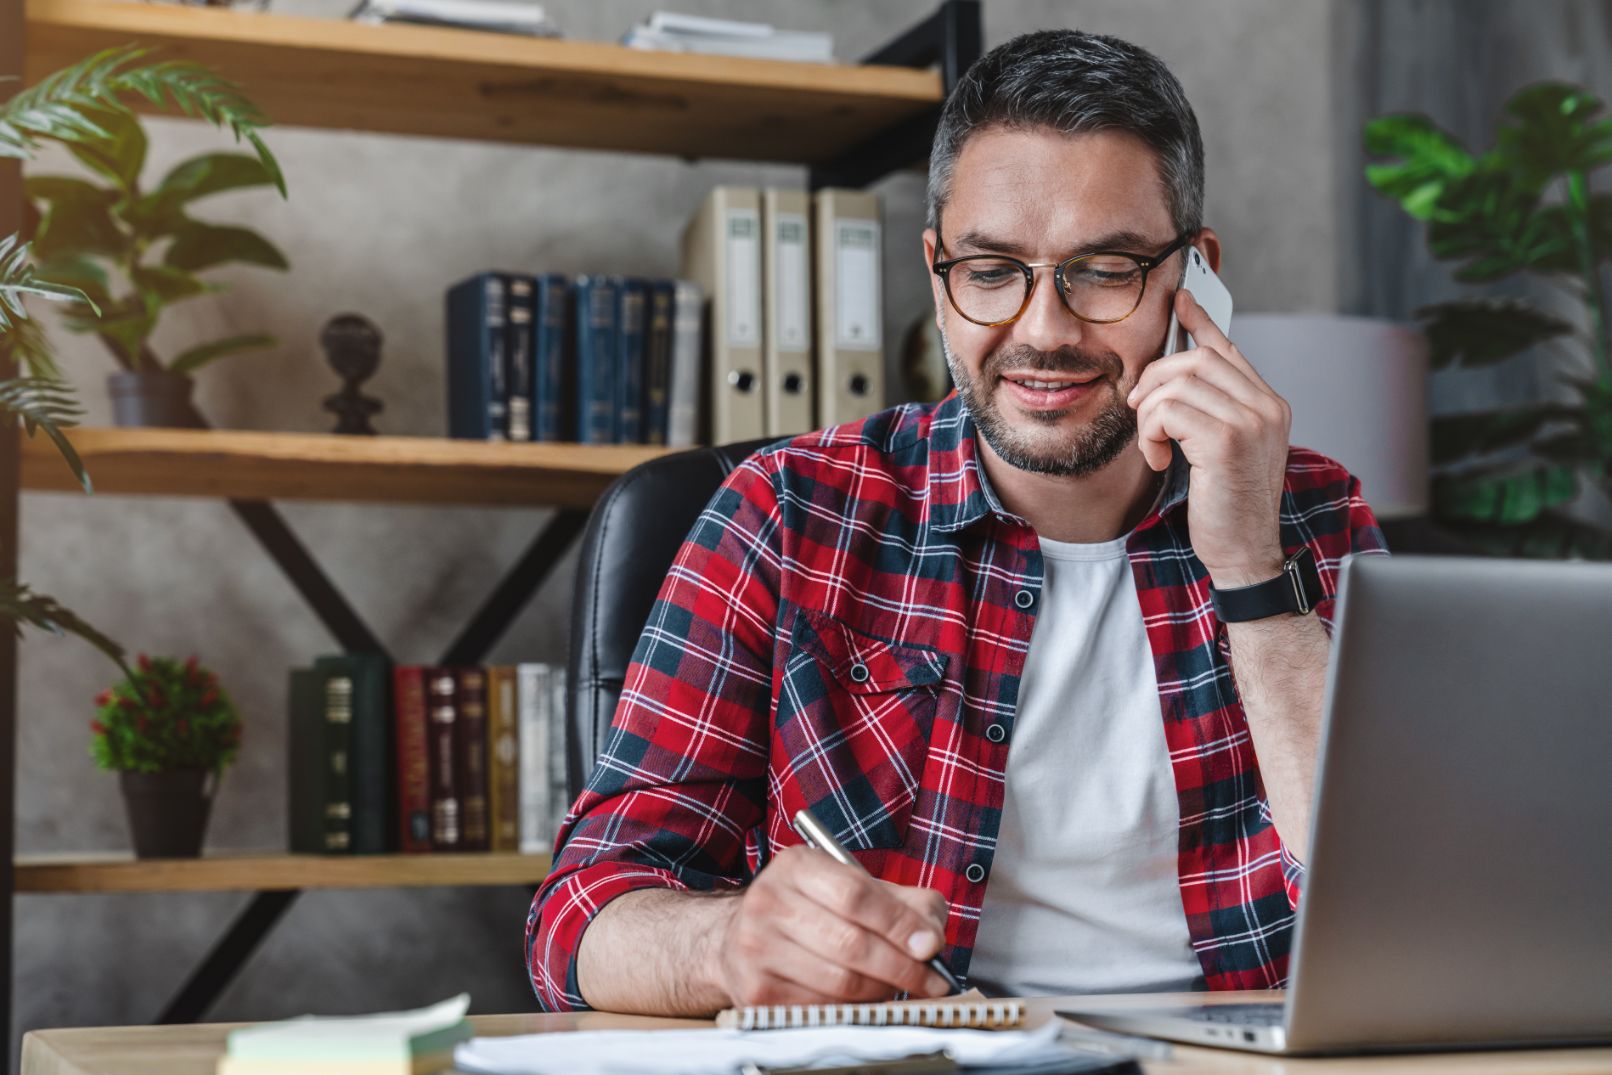 Buisness man working at desk writing notes while talking on phone